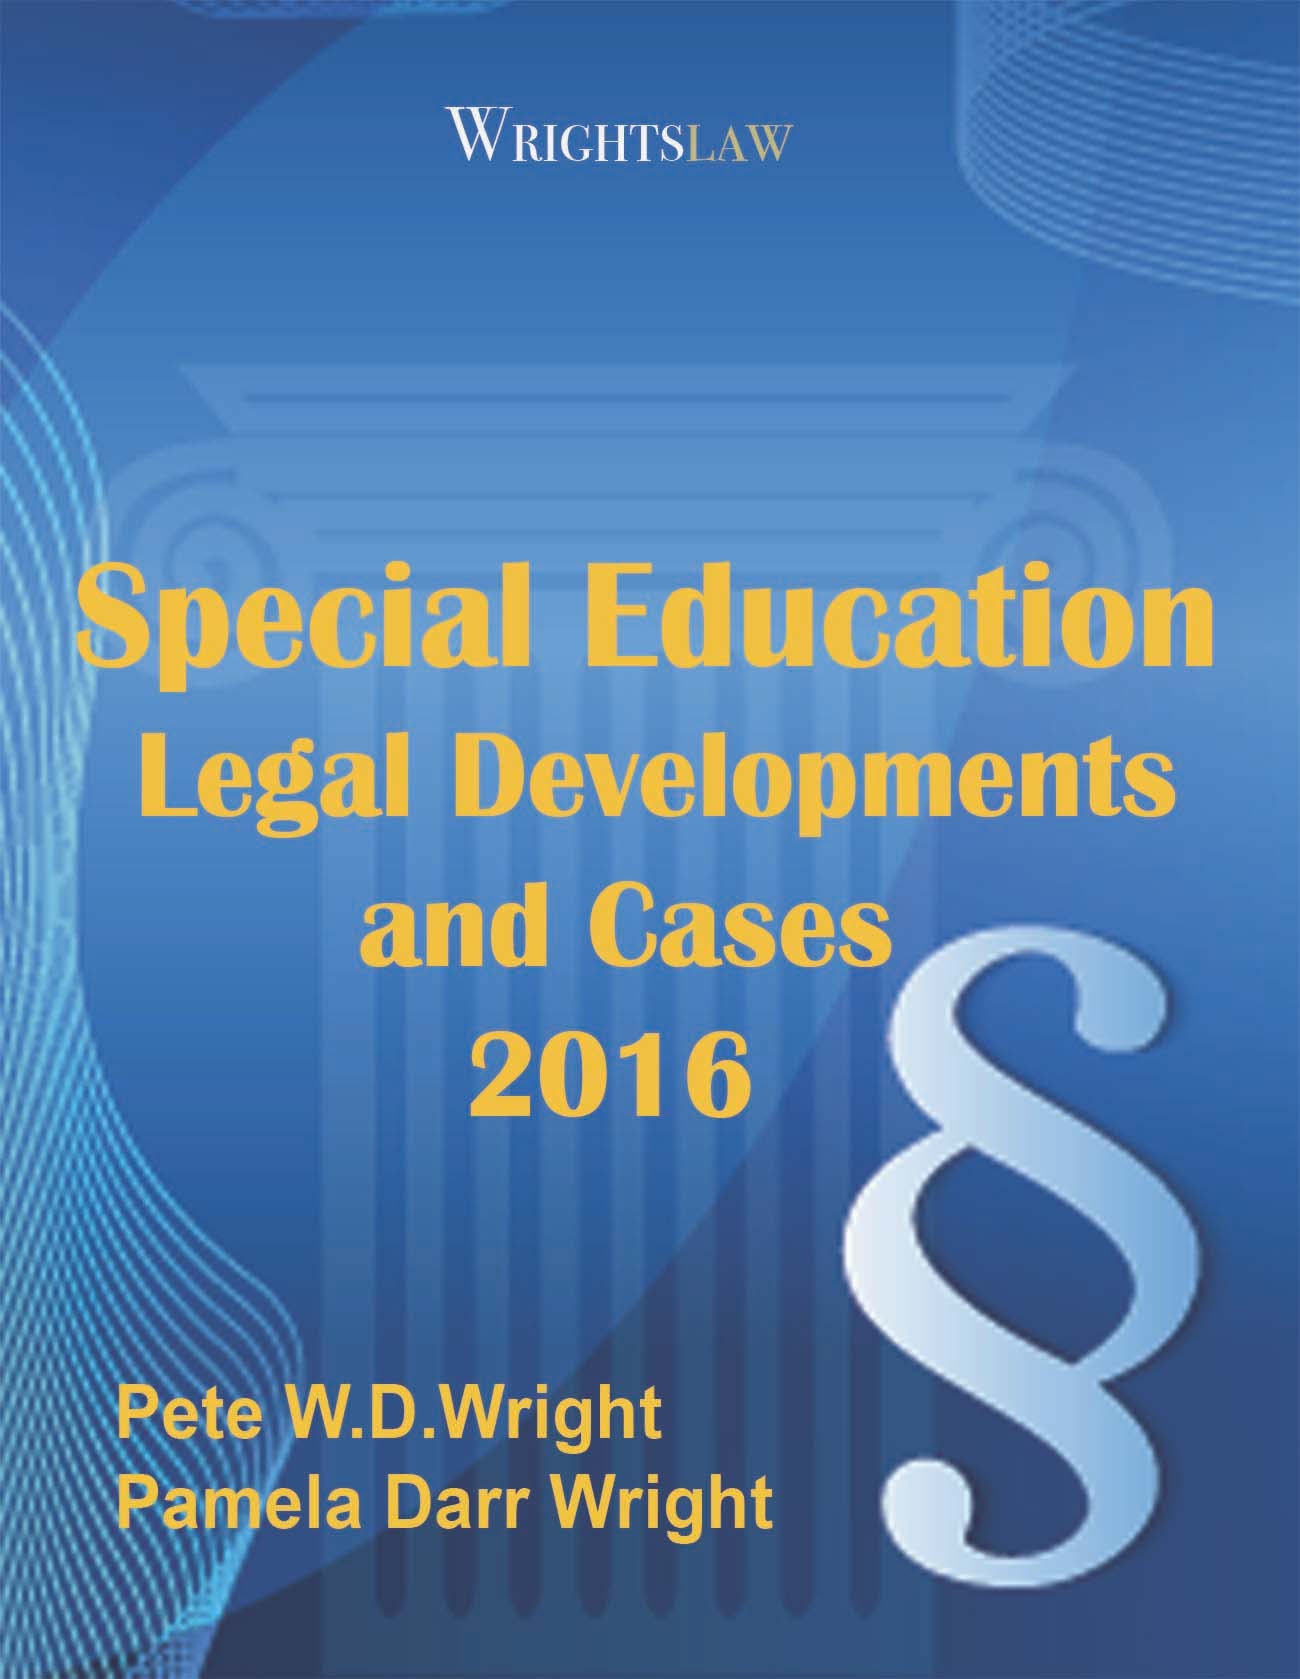 Wrightslaw Special Education Legal Developments and Cases 2016